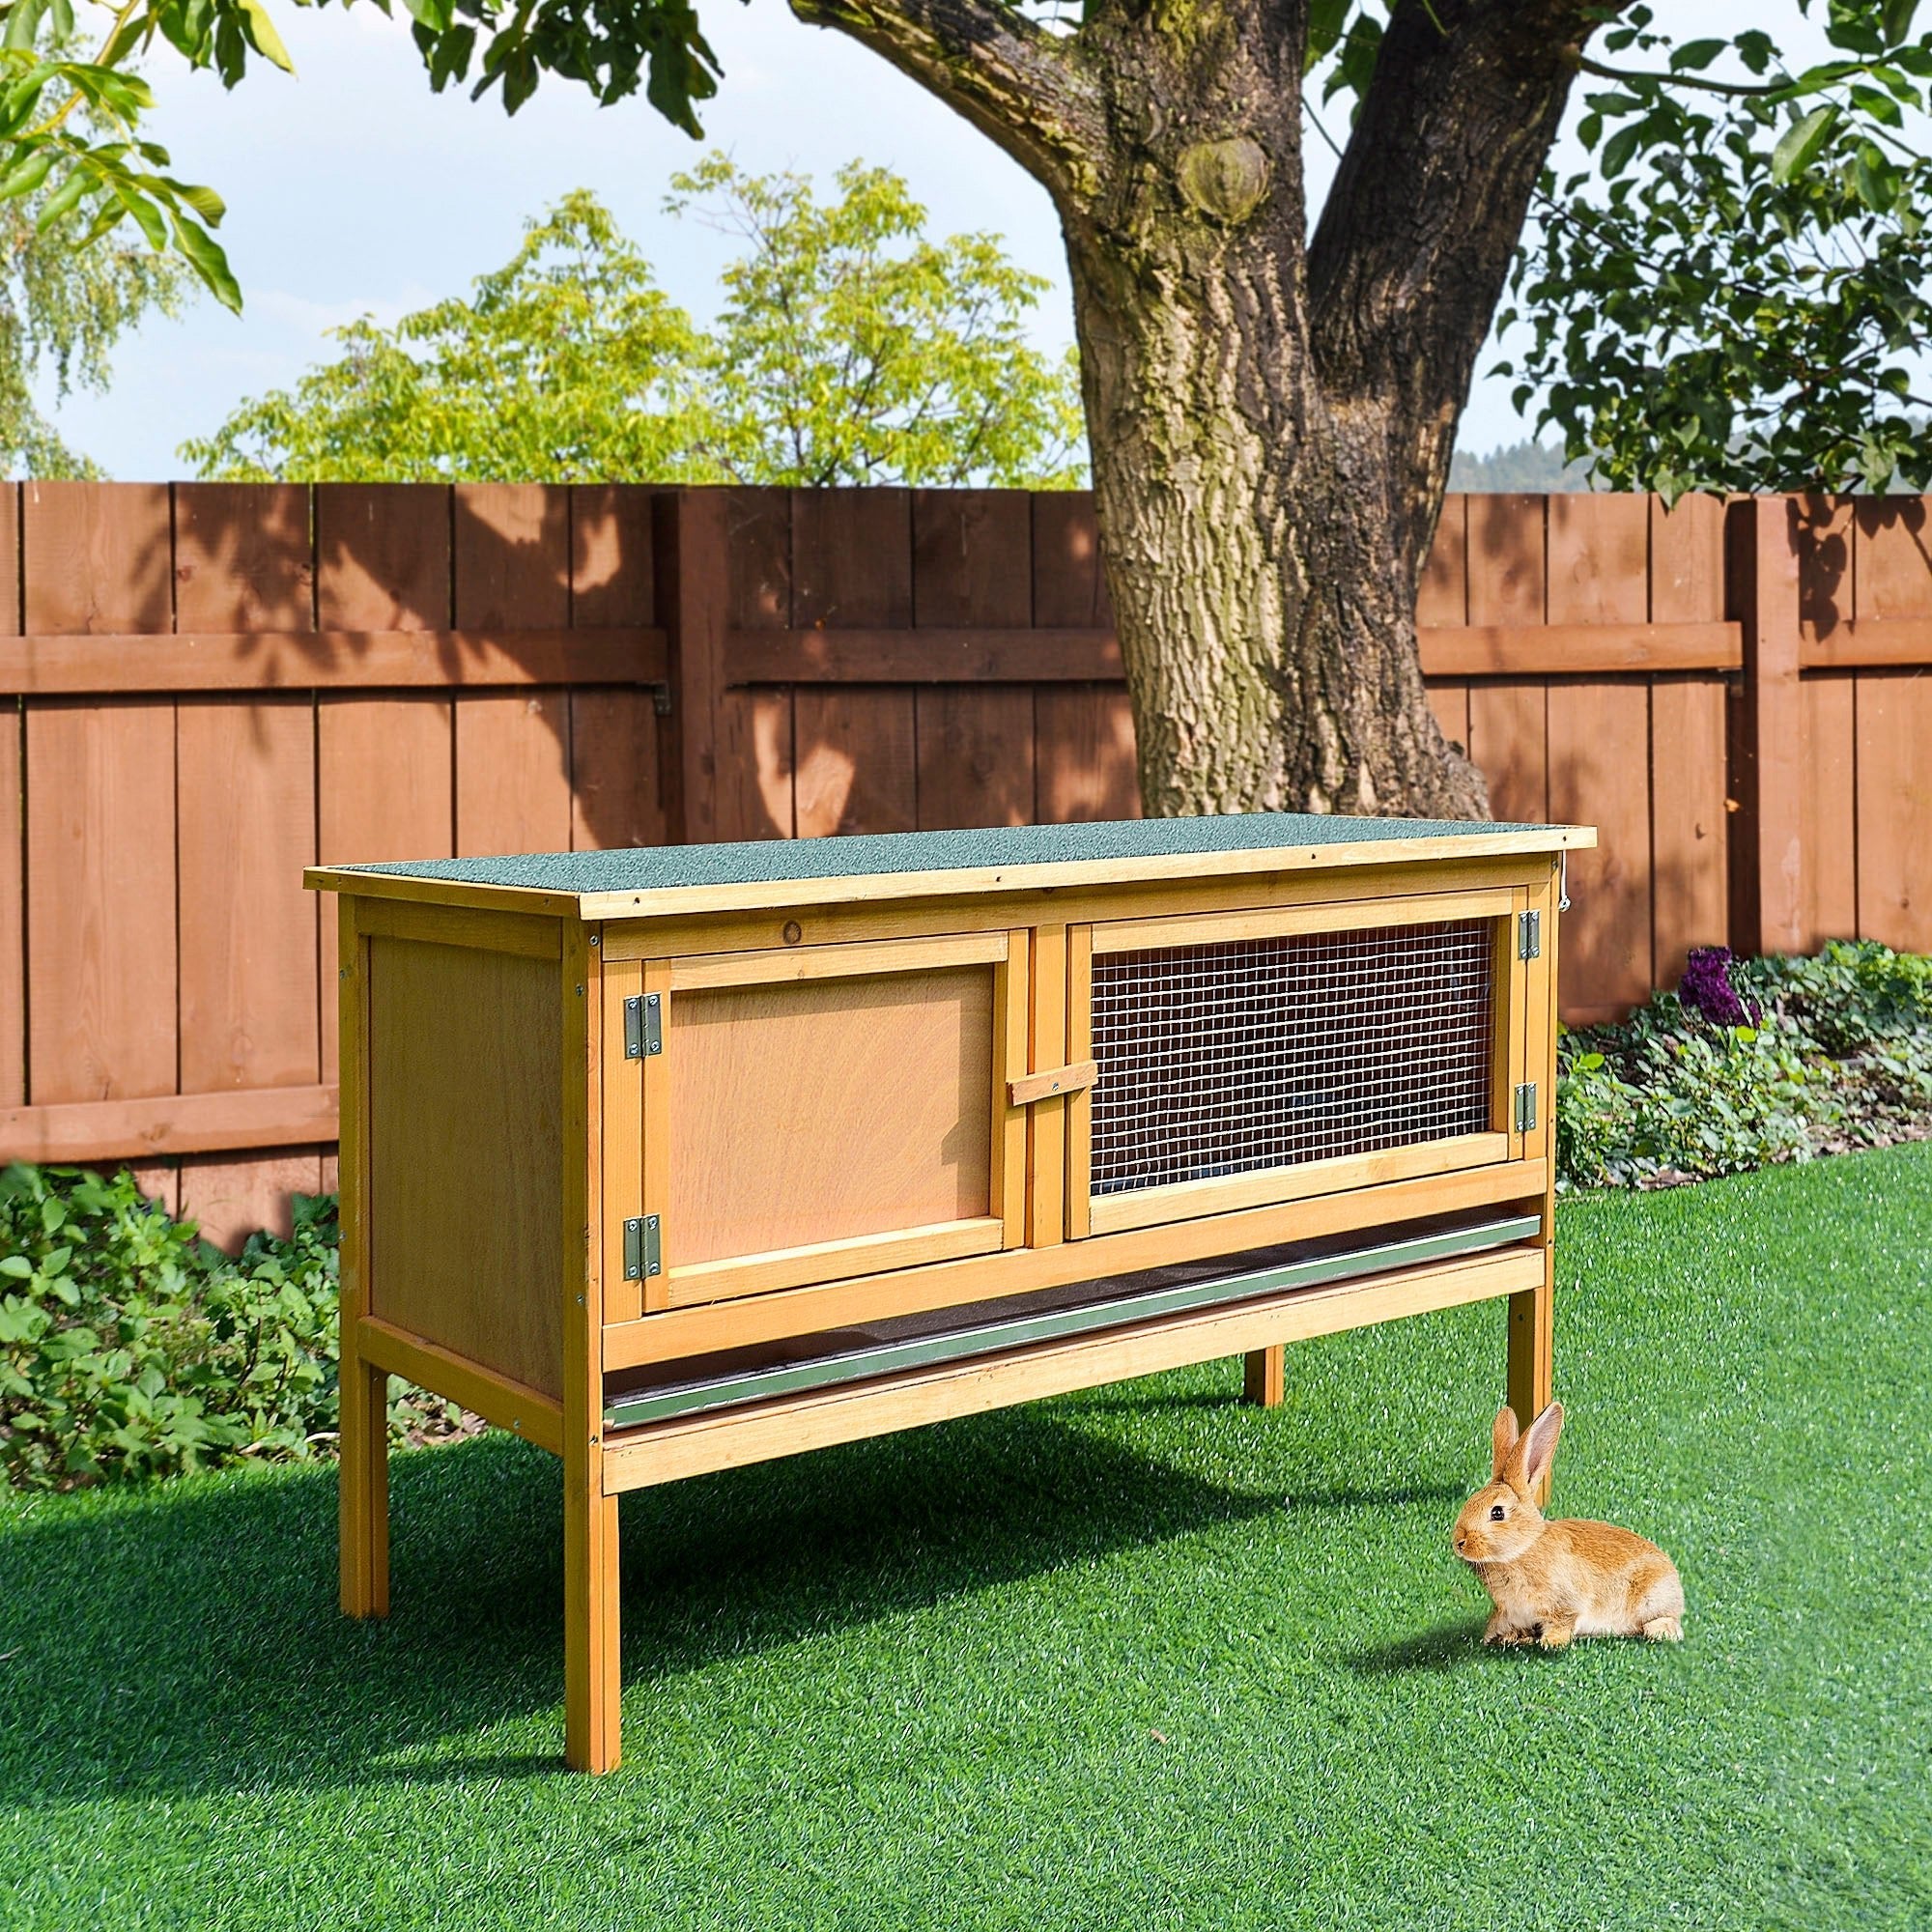 Wooden Rabbit Hutch Guinea Pigs House Outdoor Small Animal Bunny Cage w/ Hinged Top Slide out Tray 115 x 44.3 x 65 cm, PawHut,